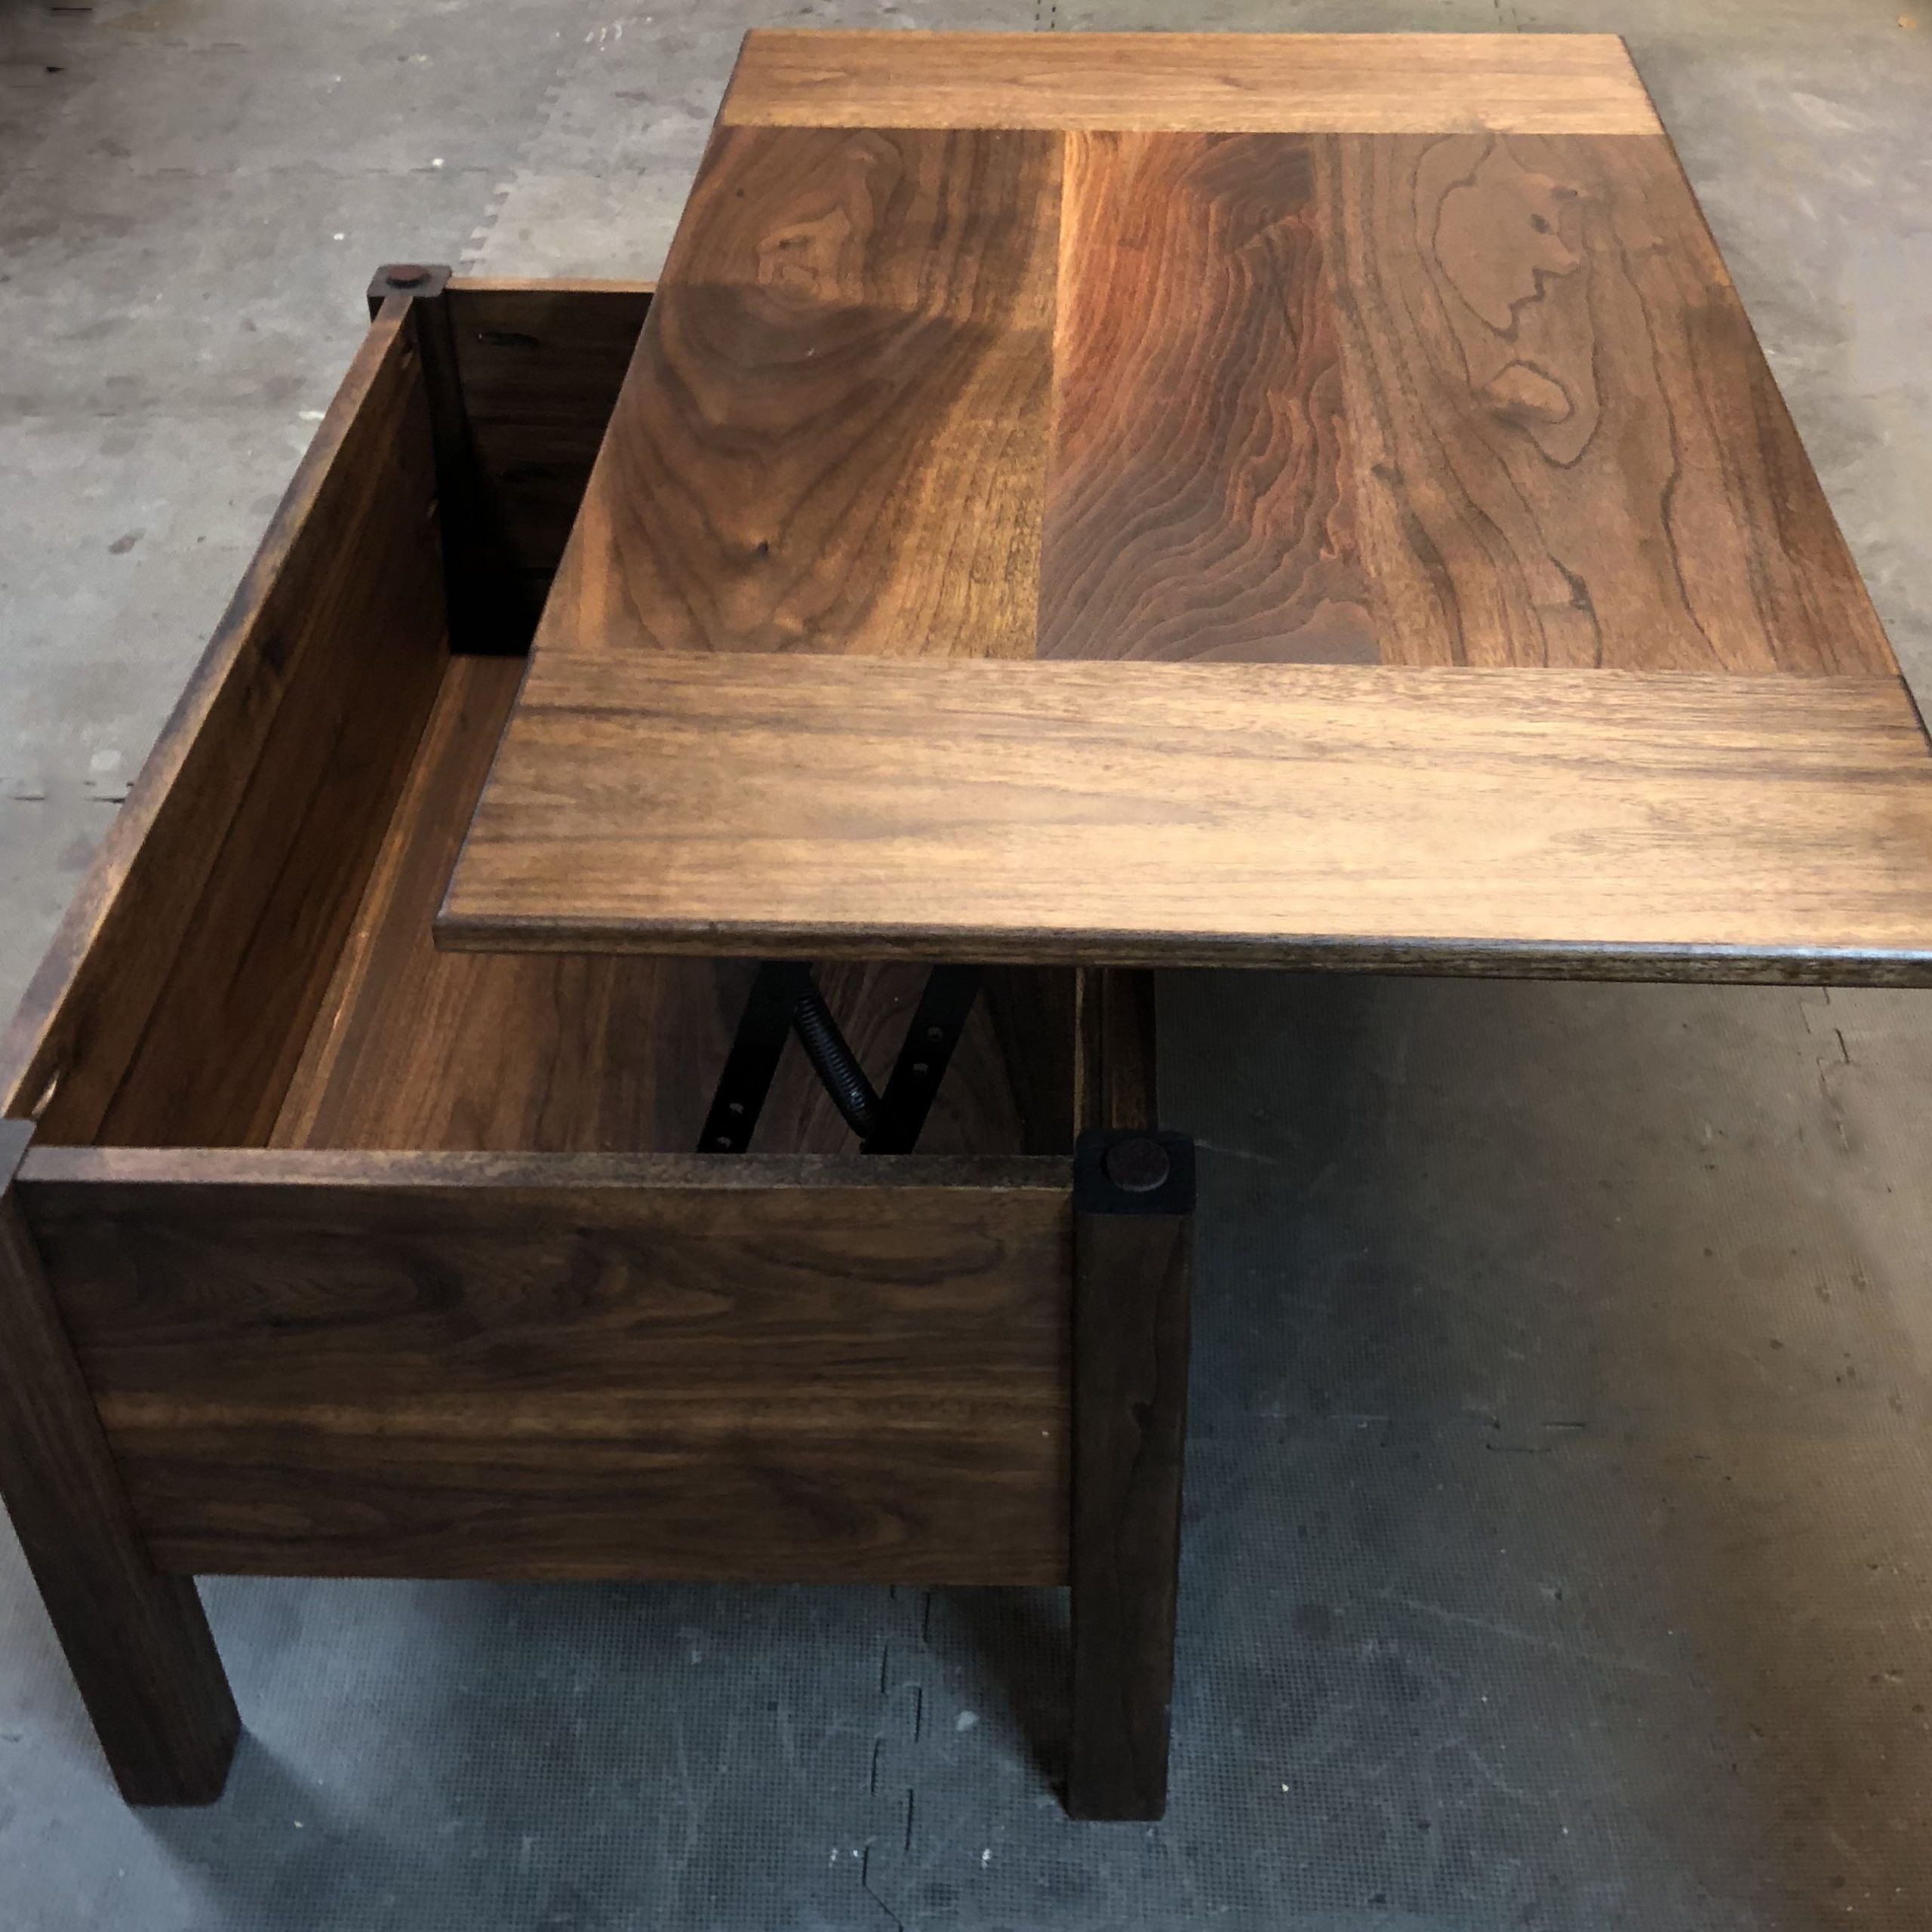 Buy Hand Made Lift Top Combination Storage Coffee Table And Desk Made From  Solid Hardwood Or Pine, Made To Order From Mr² Woodworking (View 7 of 10)